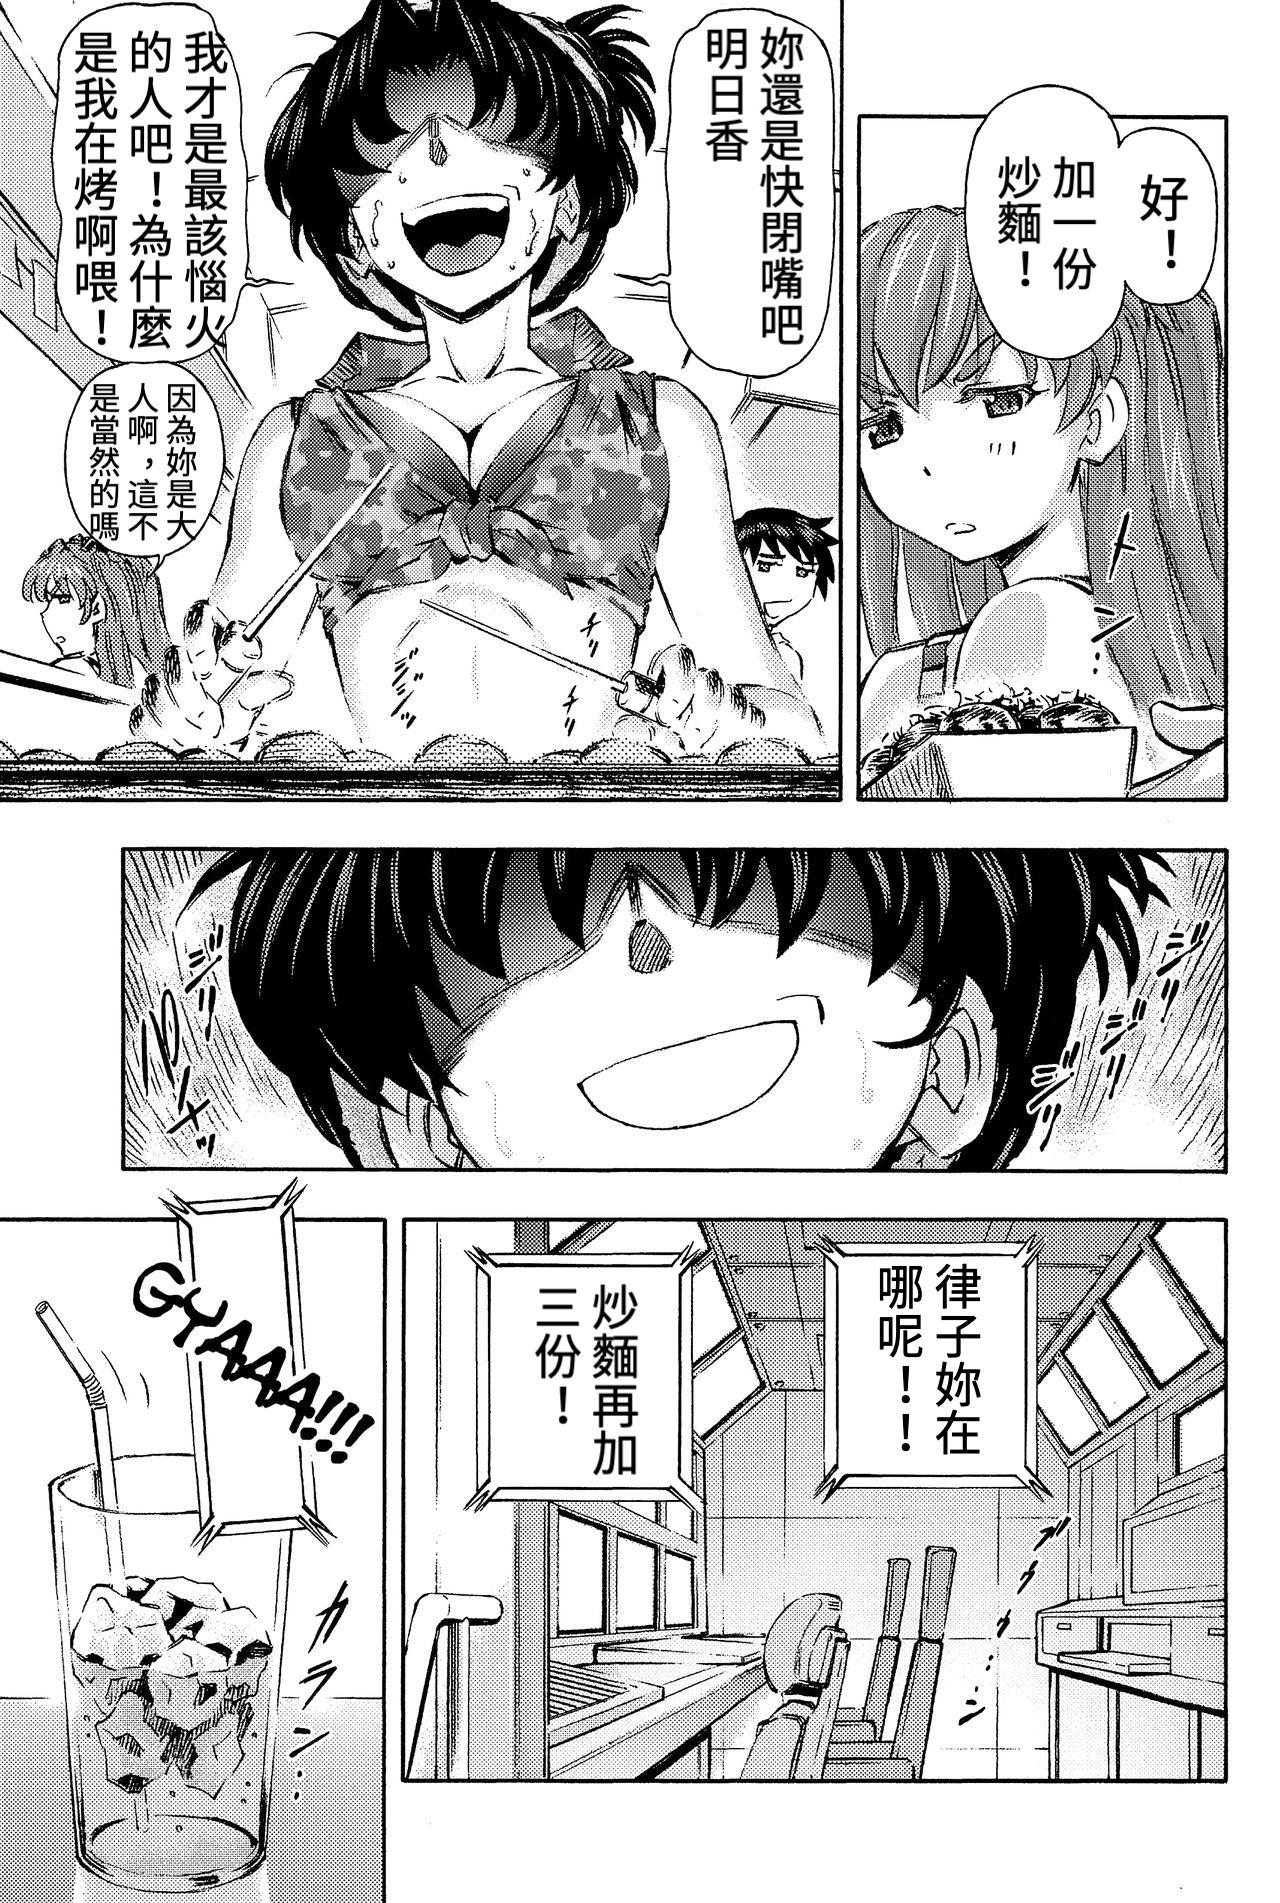 Boob 3-nin Musume to Umi no Ie - Neon genesis evangelion Trimmed - Page 4